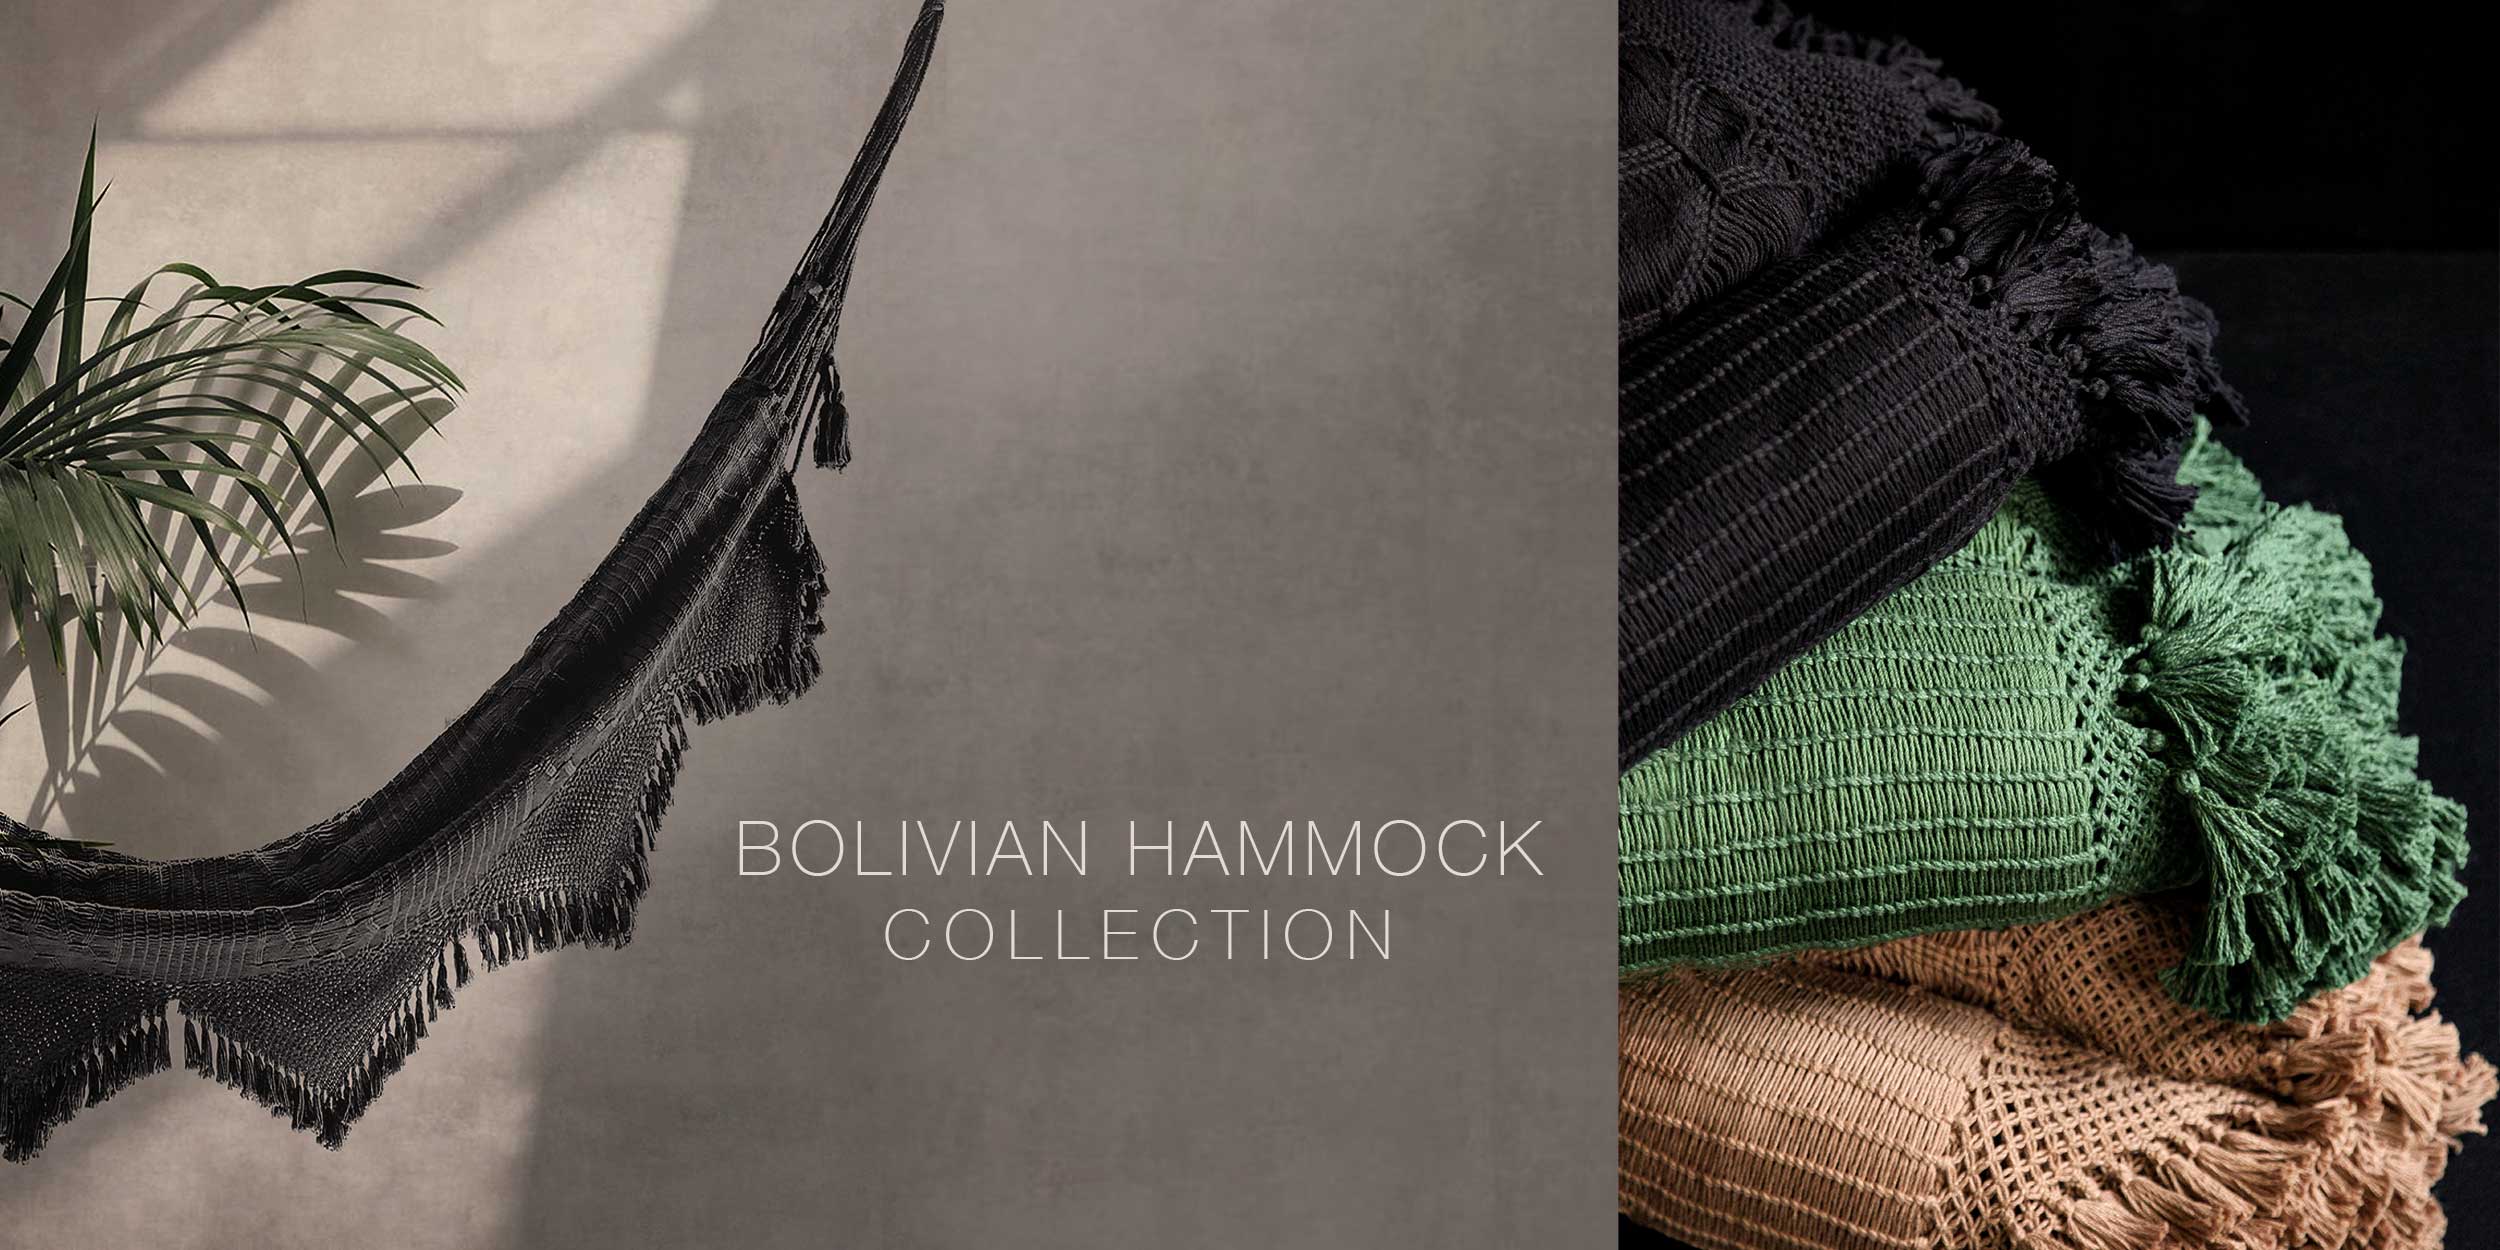 Handwoven cotton hammocks in vibrant colors from Bolivia